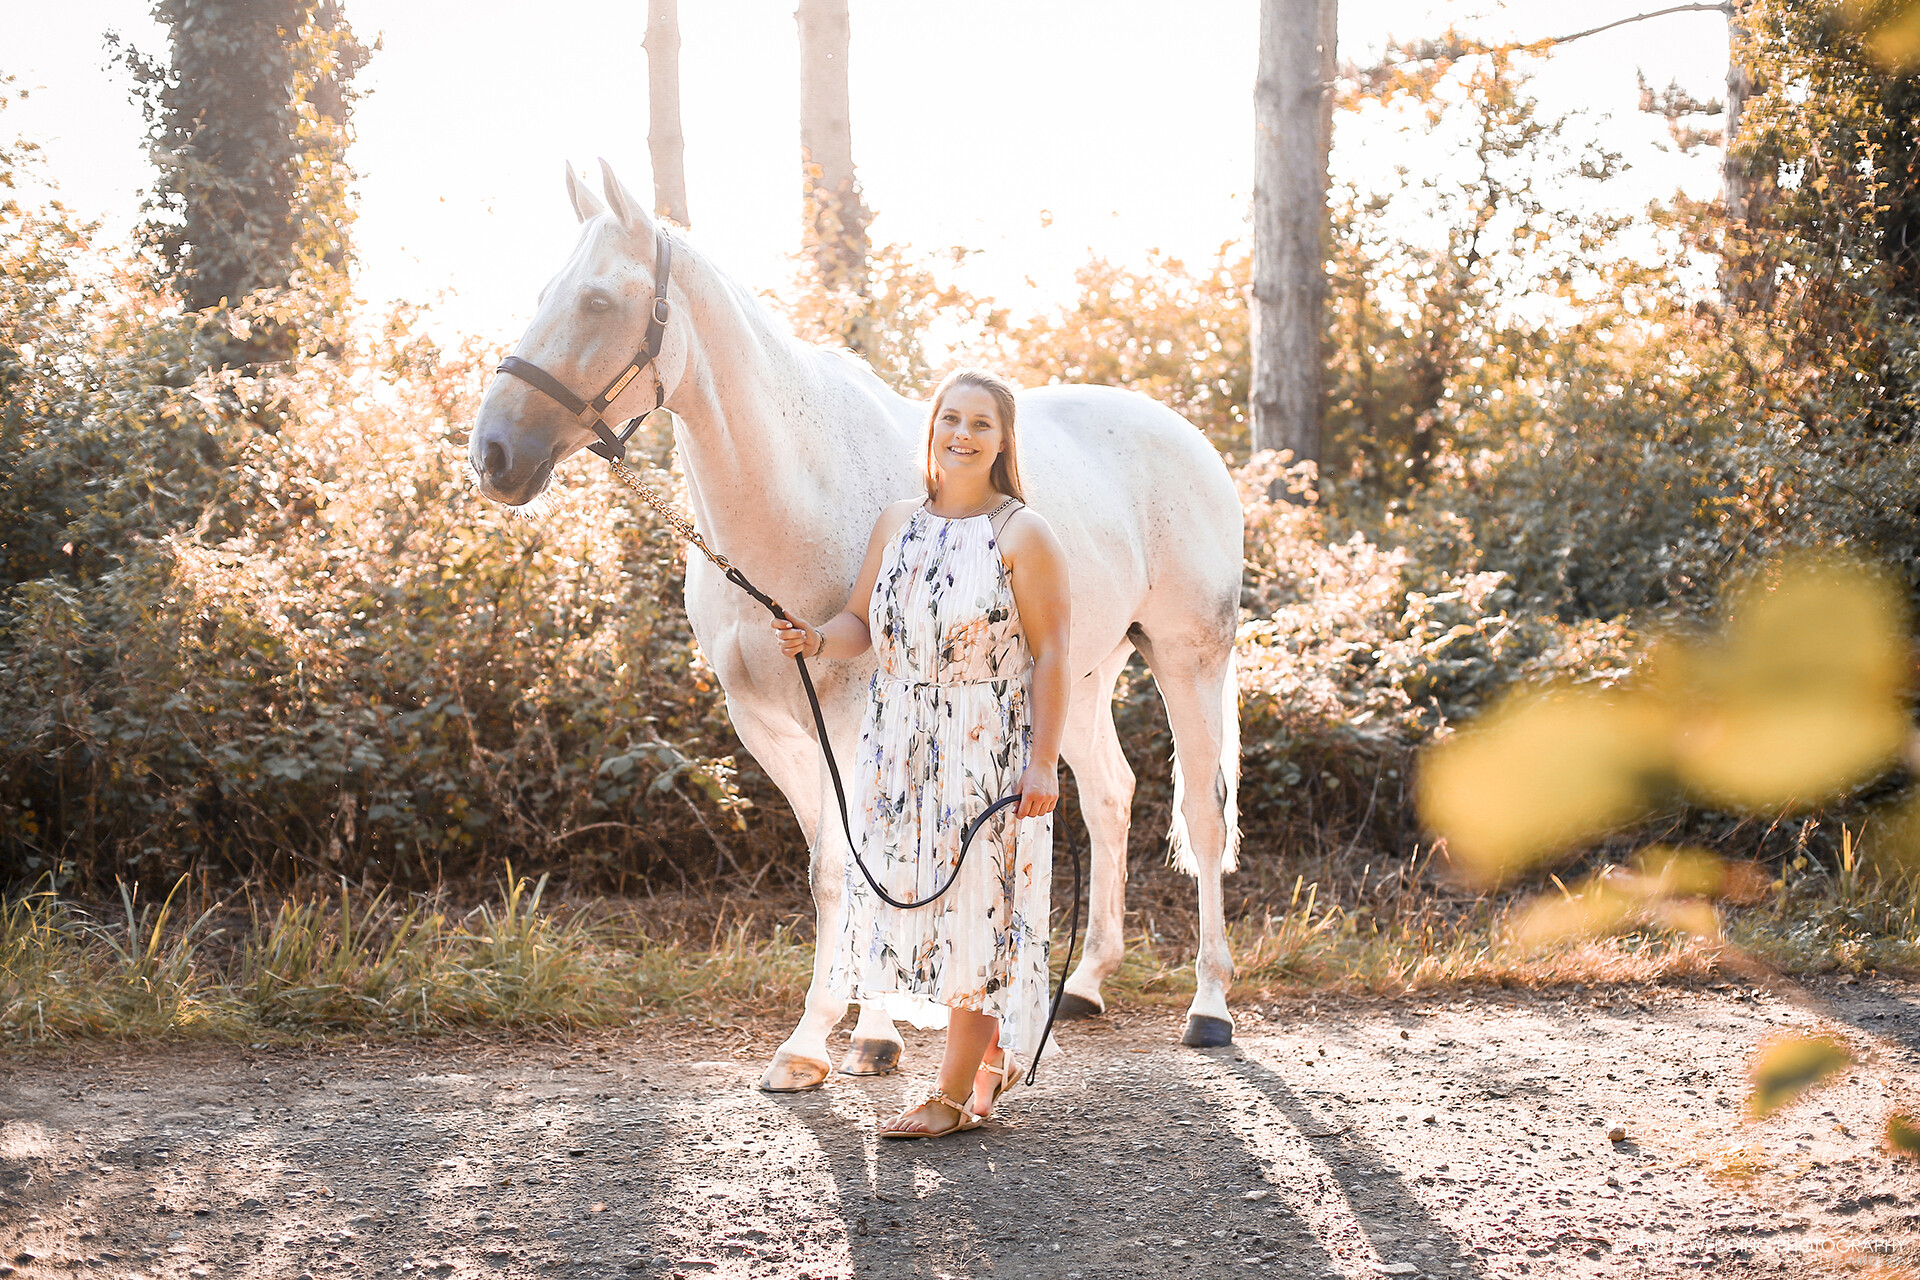 Backlit horse and rider in a dress with out-of-focus leaves in the foreground